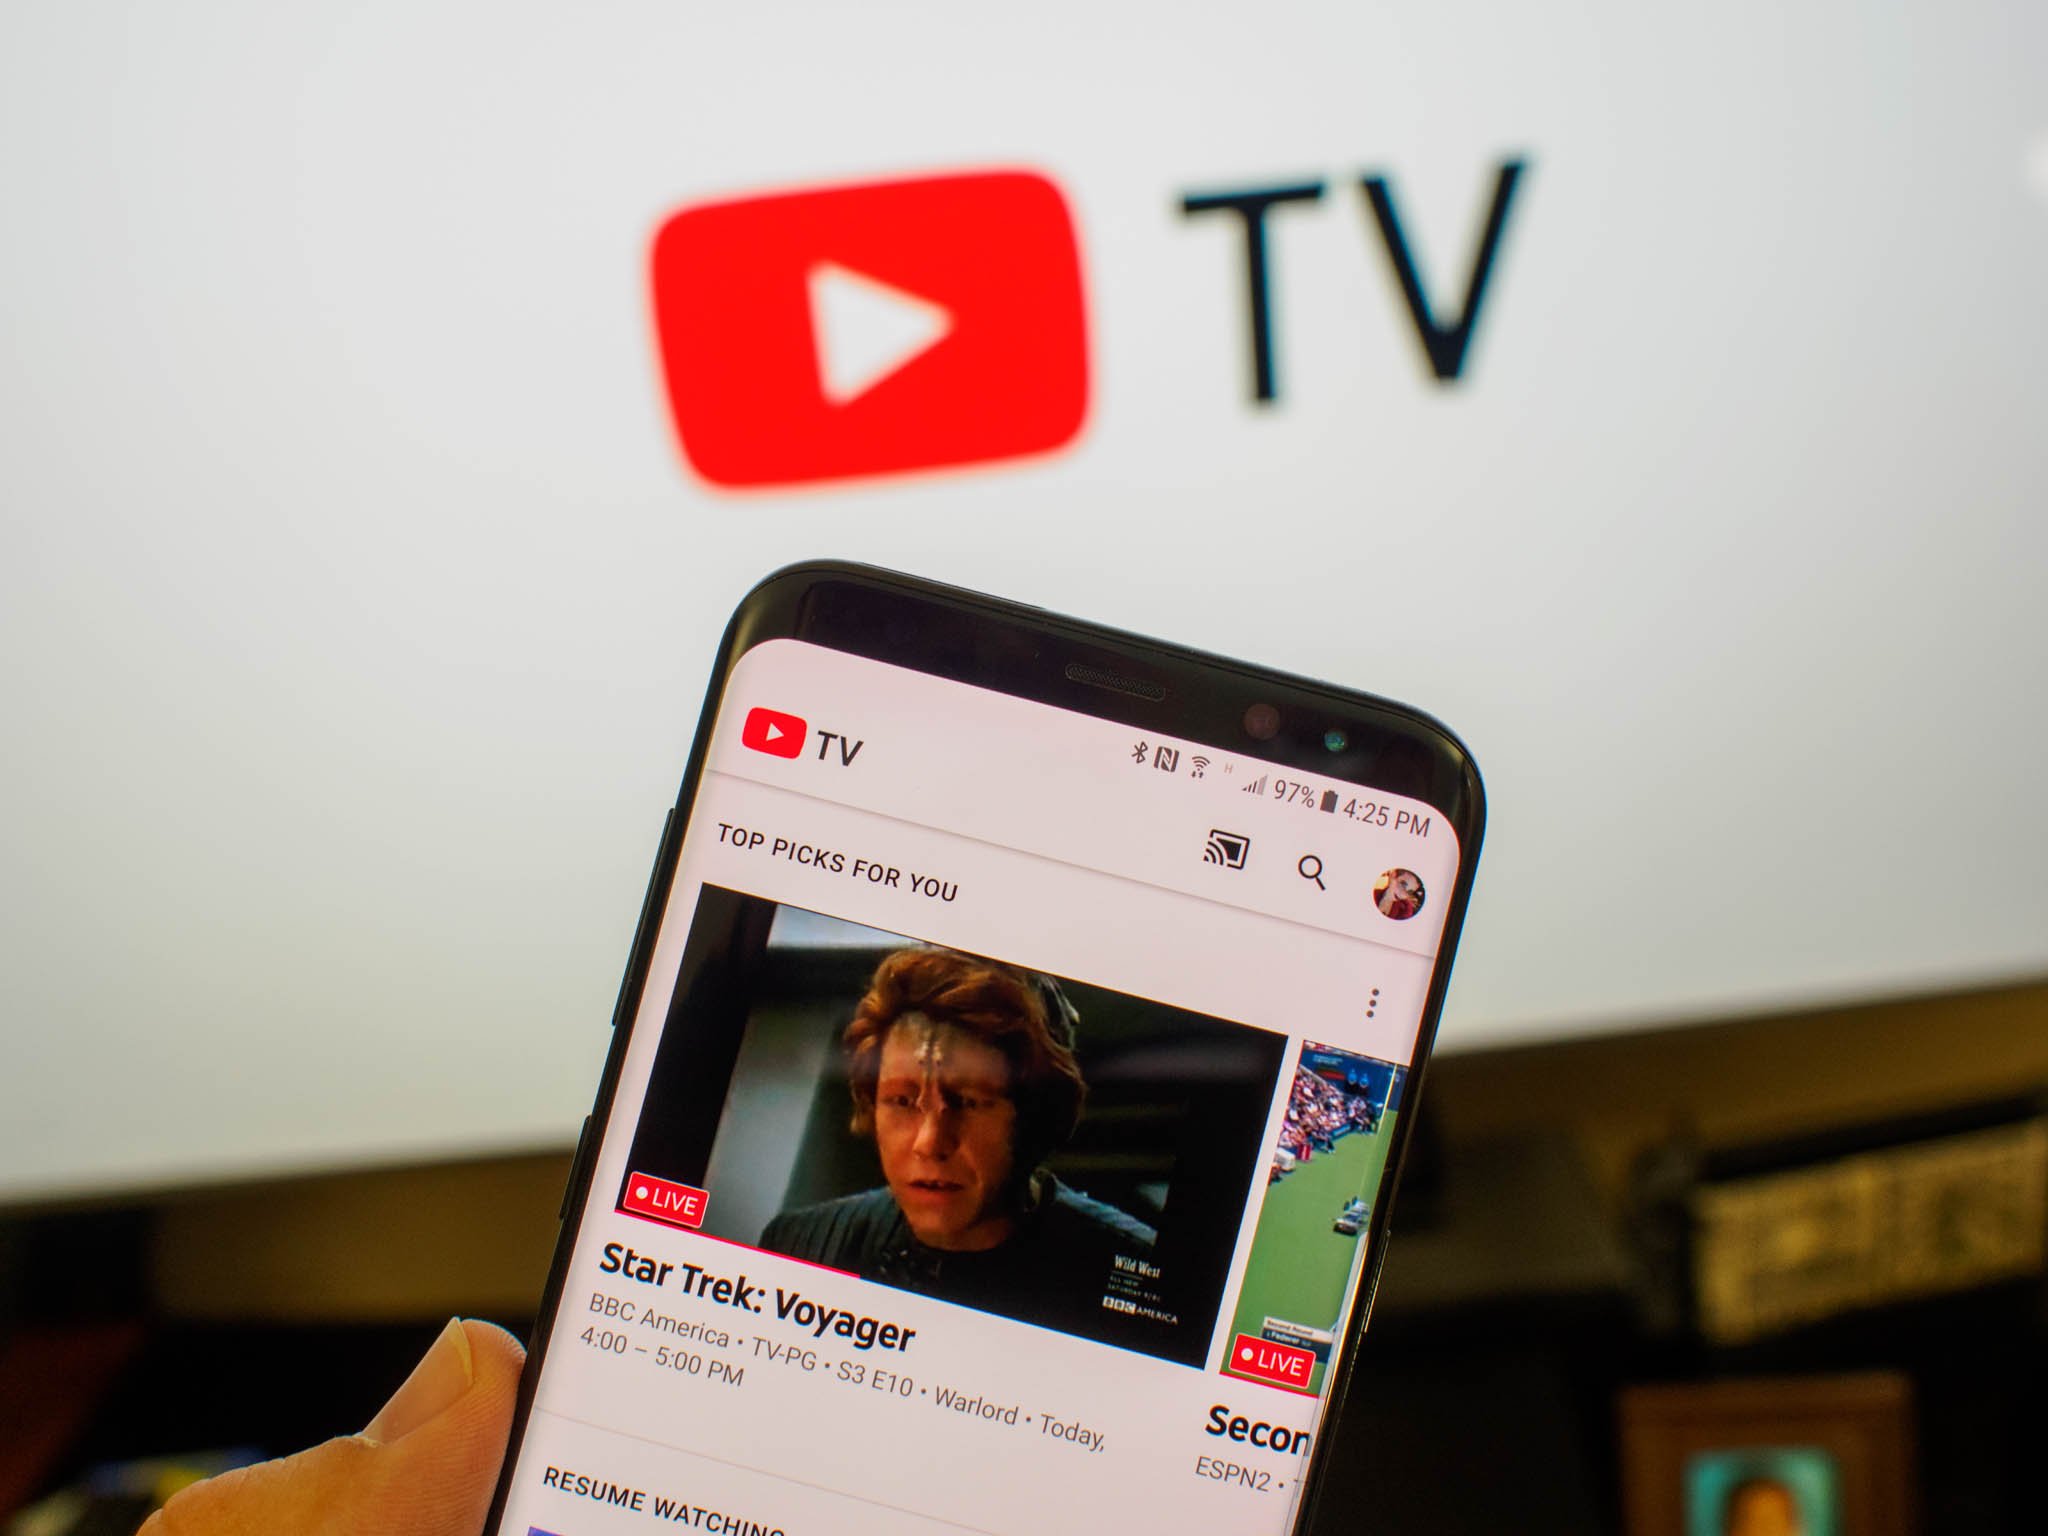 Youtube Tv App Now Available For Samsung And Lg Smart Tvs